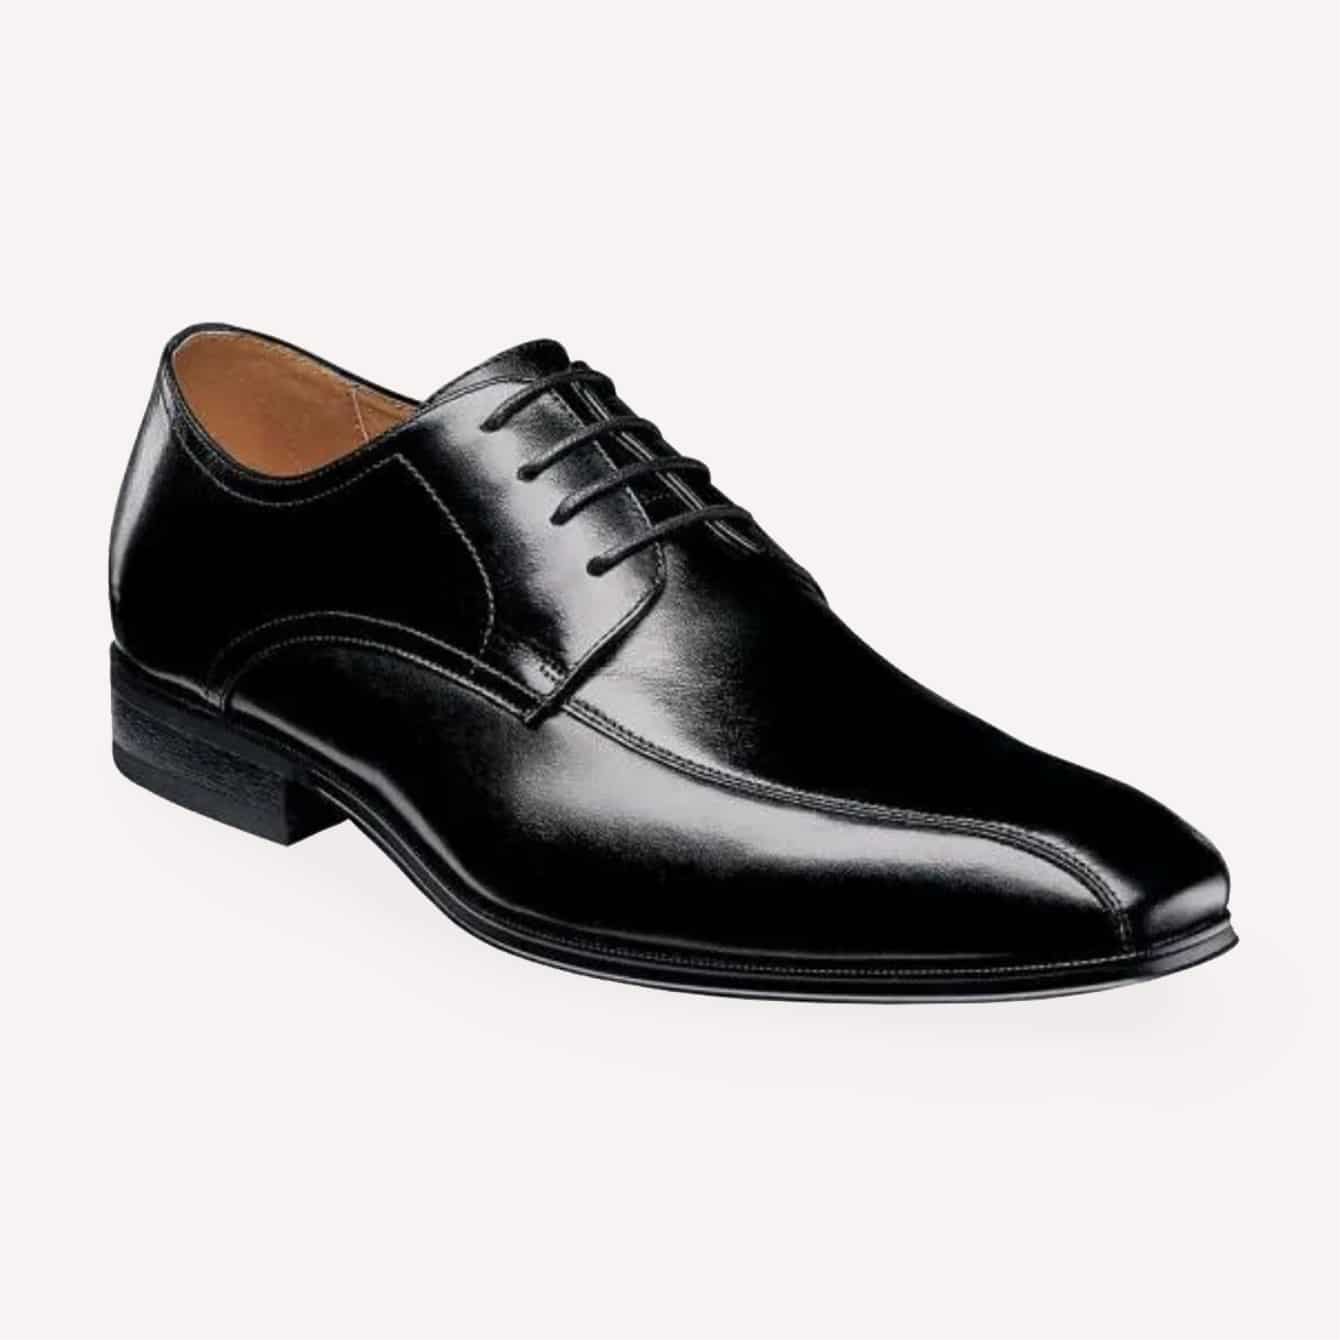 Large Size Shoes For Men: Best Dress Shoes for Size 14 and 15 – Ace Marks